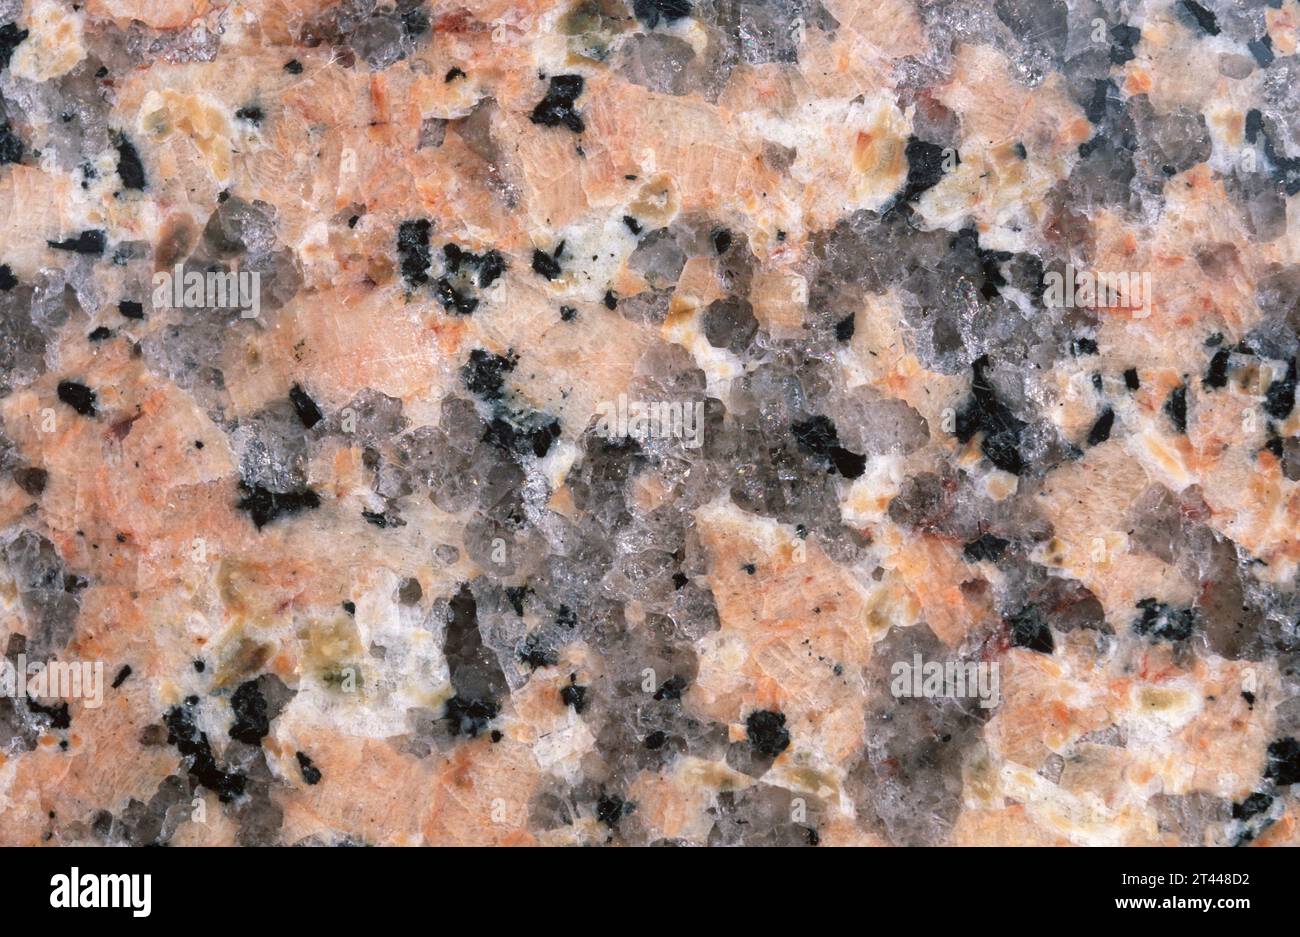 Pink granite. Granite is an igneous intrusive rock with holocrystalline texture. Polished surface. Stock Photo